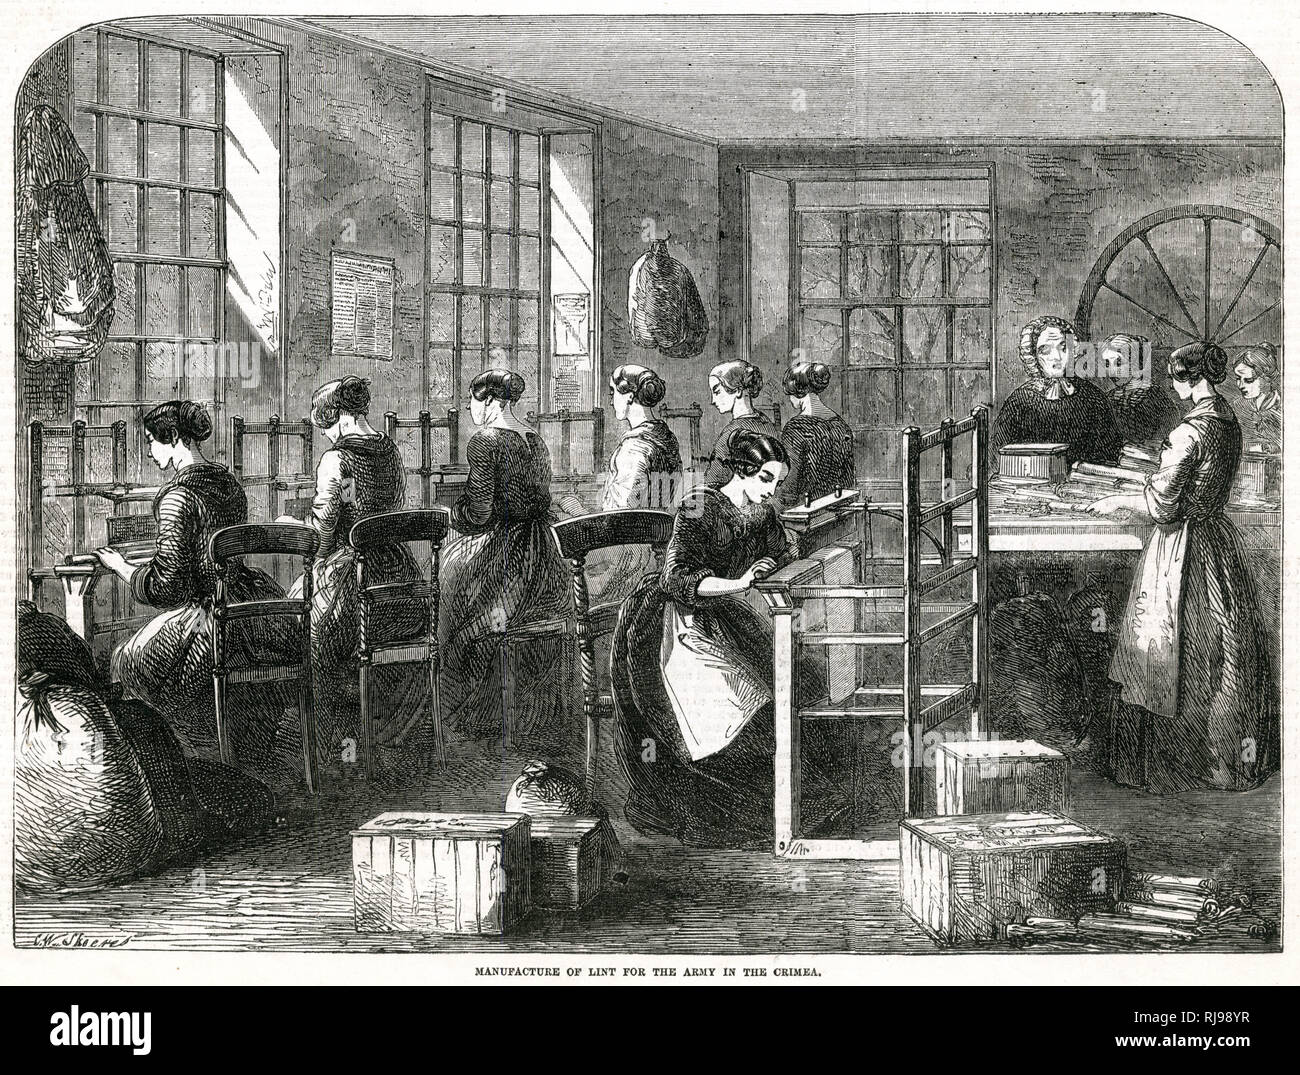 Manufacture of lint for the army in Crimea 1855 Stock Photo